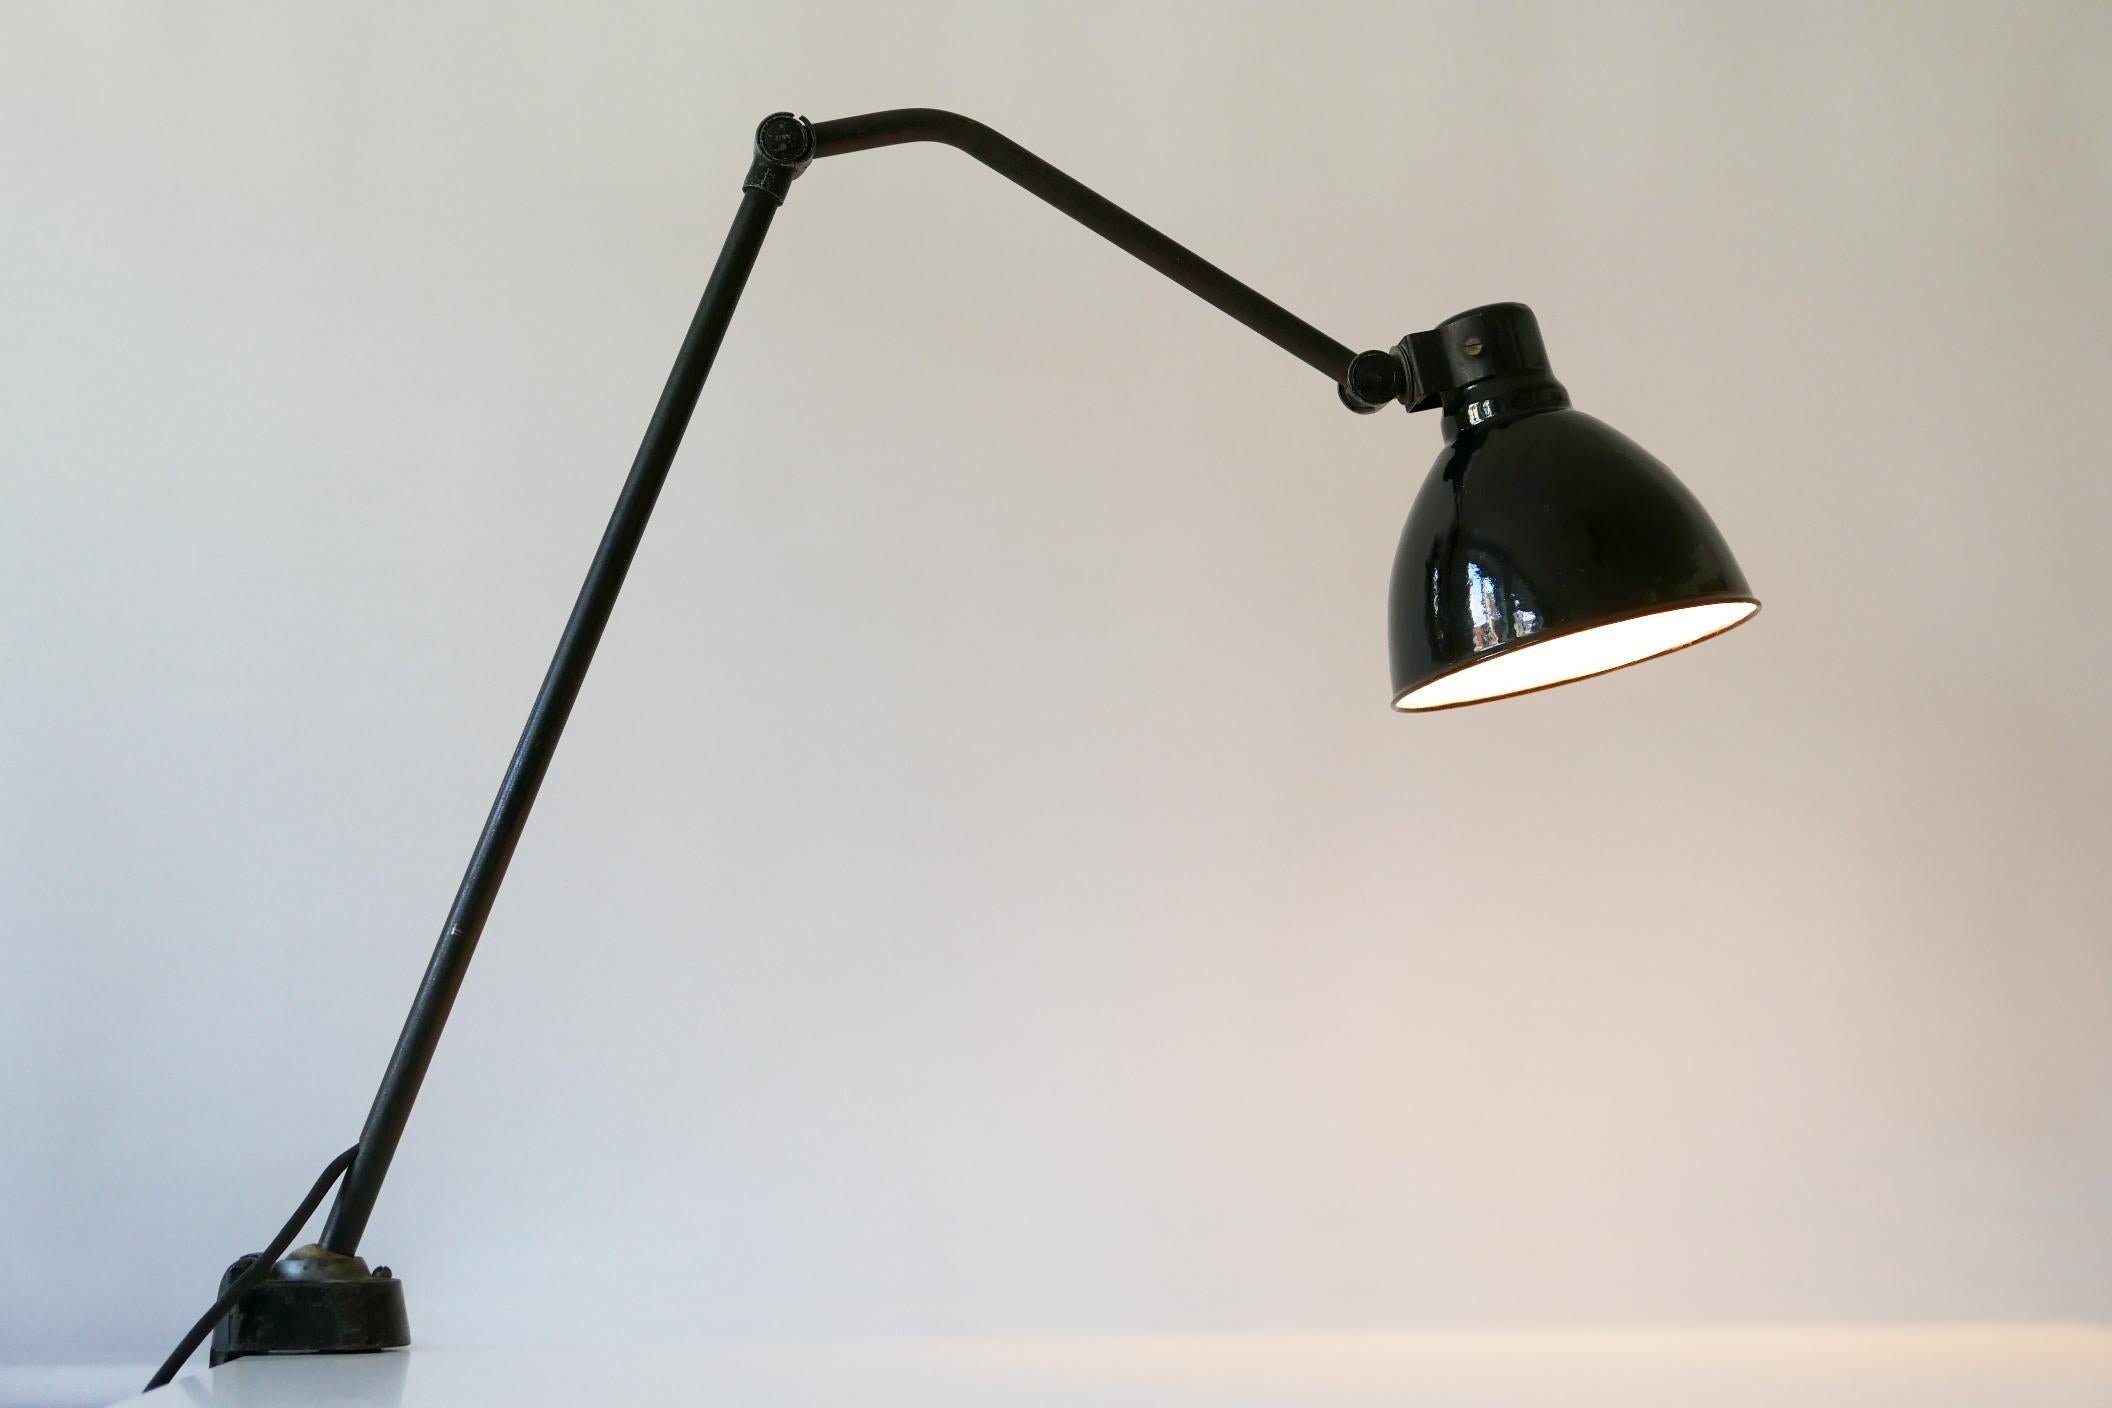 Extremely rare and articulated Bauhaus or Modernist task lamp or clamp table light. Designed by Peter Behrens for AEG, Germany, 1920s.

Executed in black enameled metal, the lamp needs 1 x E27 Edison screw fit bulb, is wired and in working